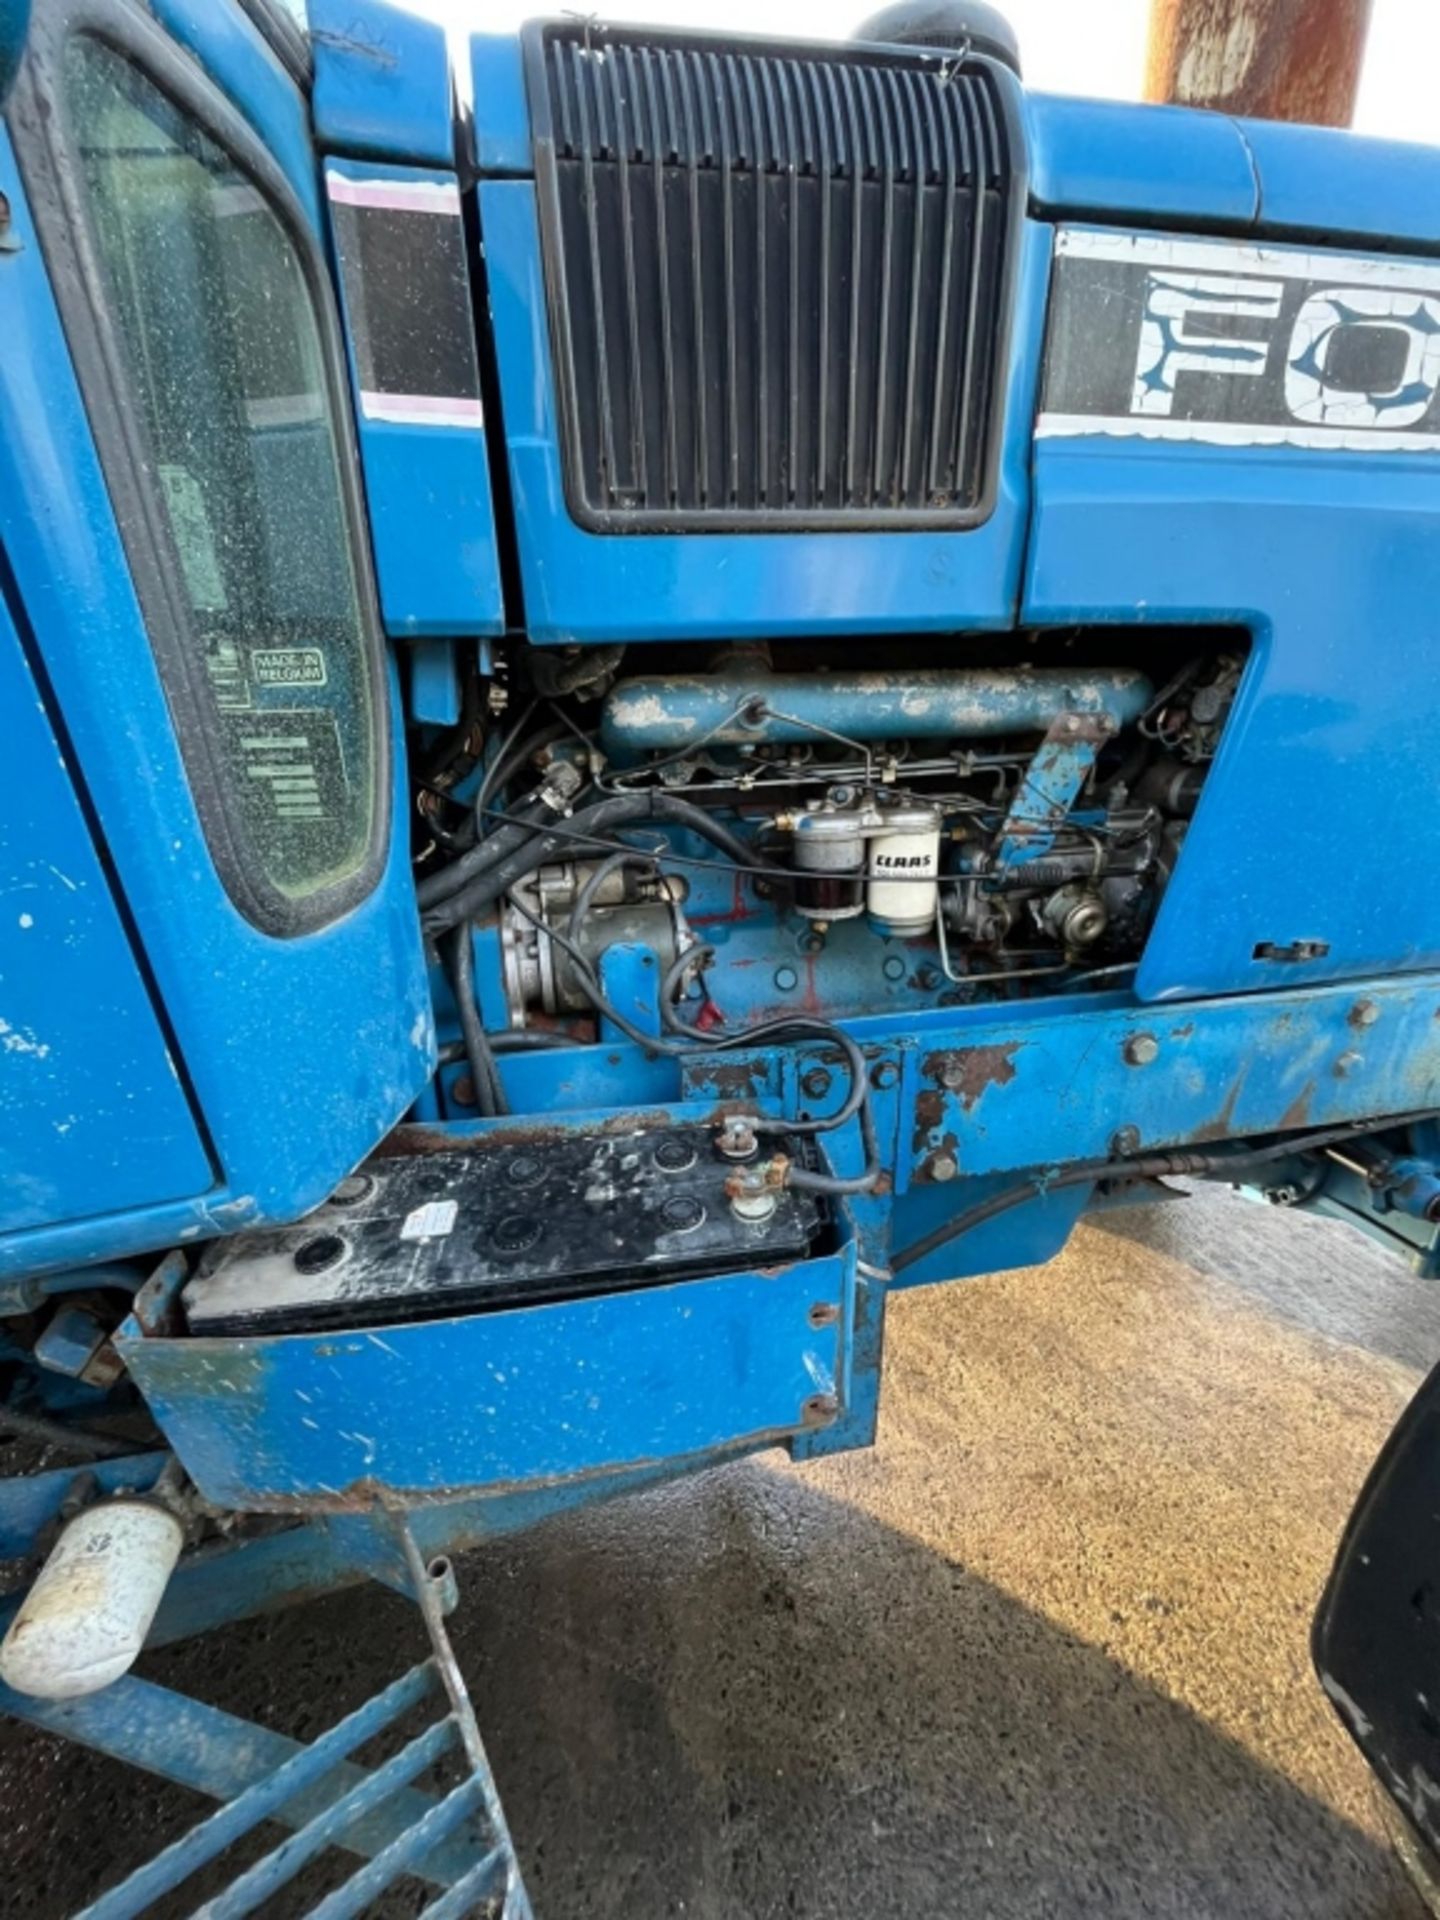 FORD 8730 POWERSHIFT TRACTOR - Image 18 of 36